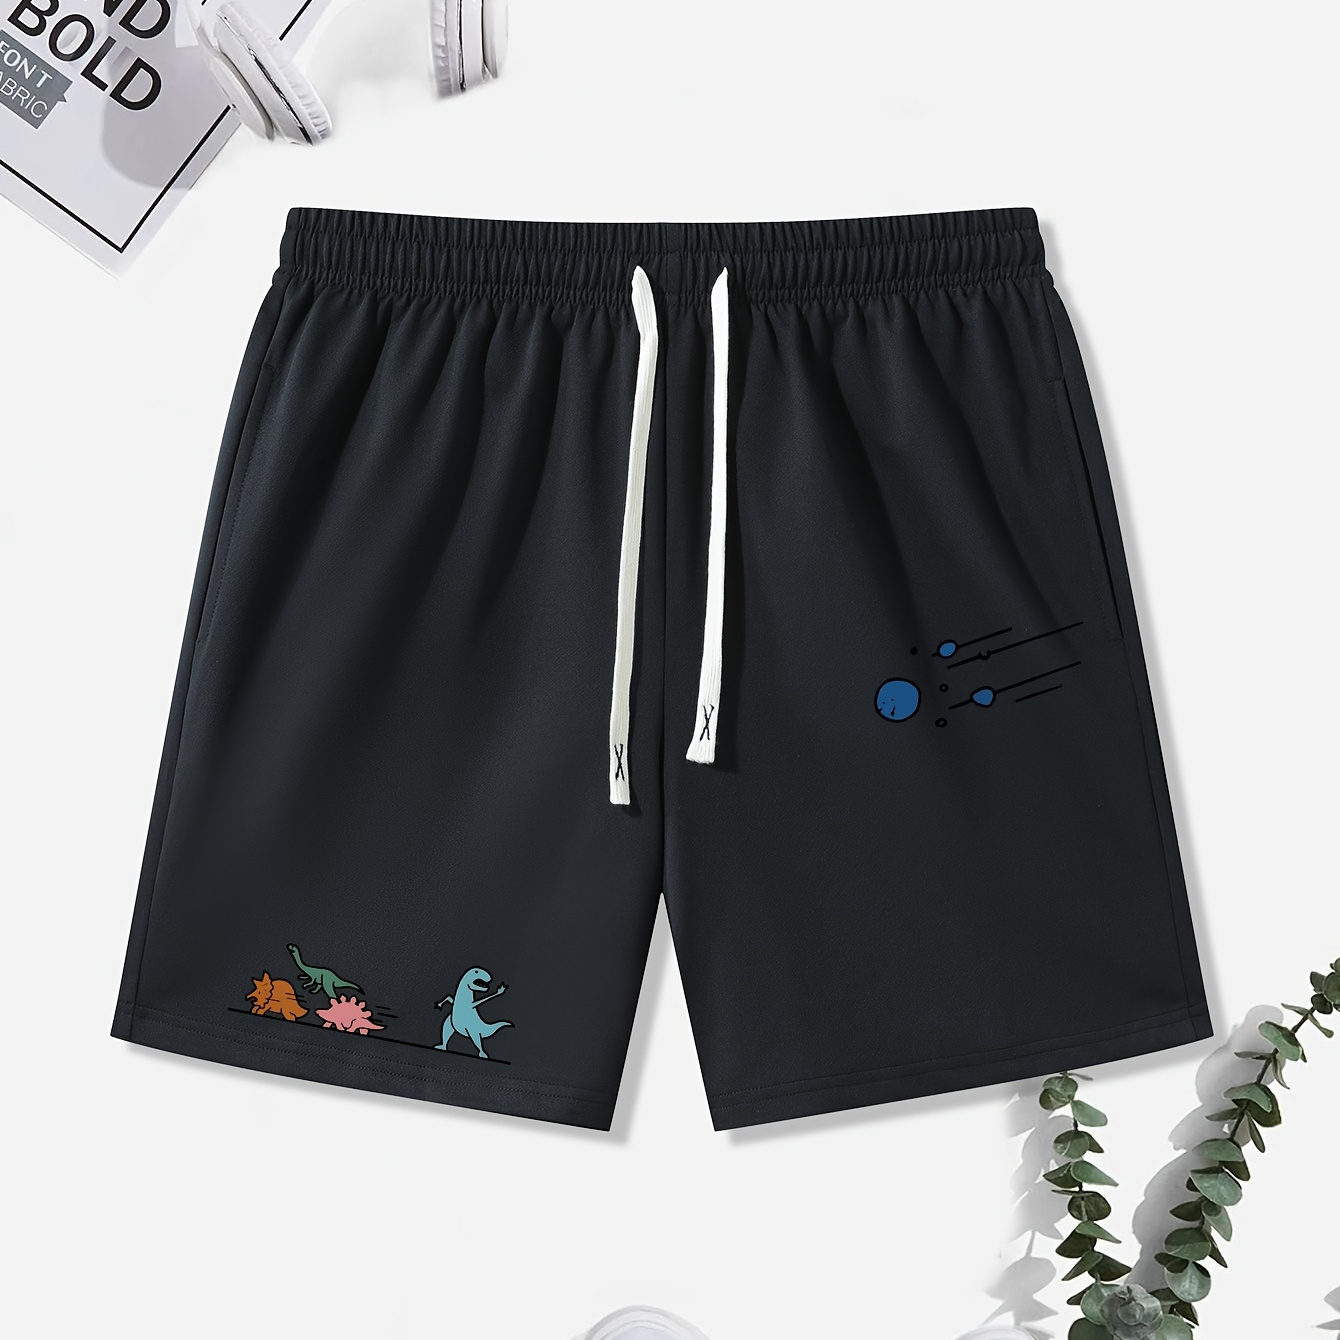 

Dinosaur Print Men's Drawstring Pants Loose Casual Waist Simple Style Comfy Shorts For Spring Summer Outdoor Fitness Holiday Daily Commute Dates